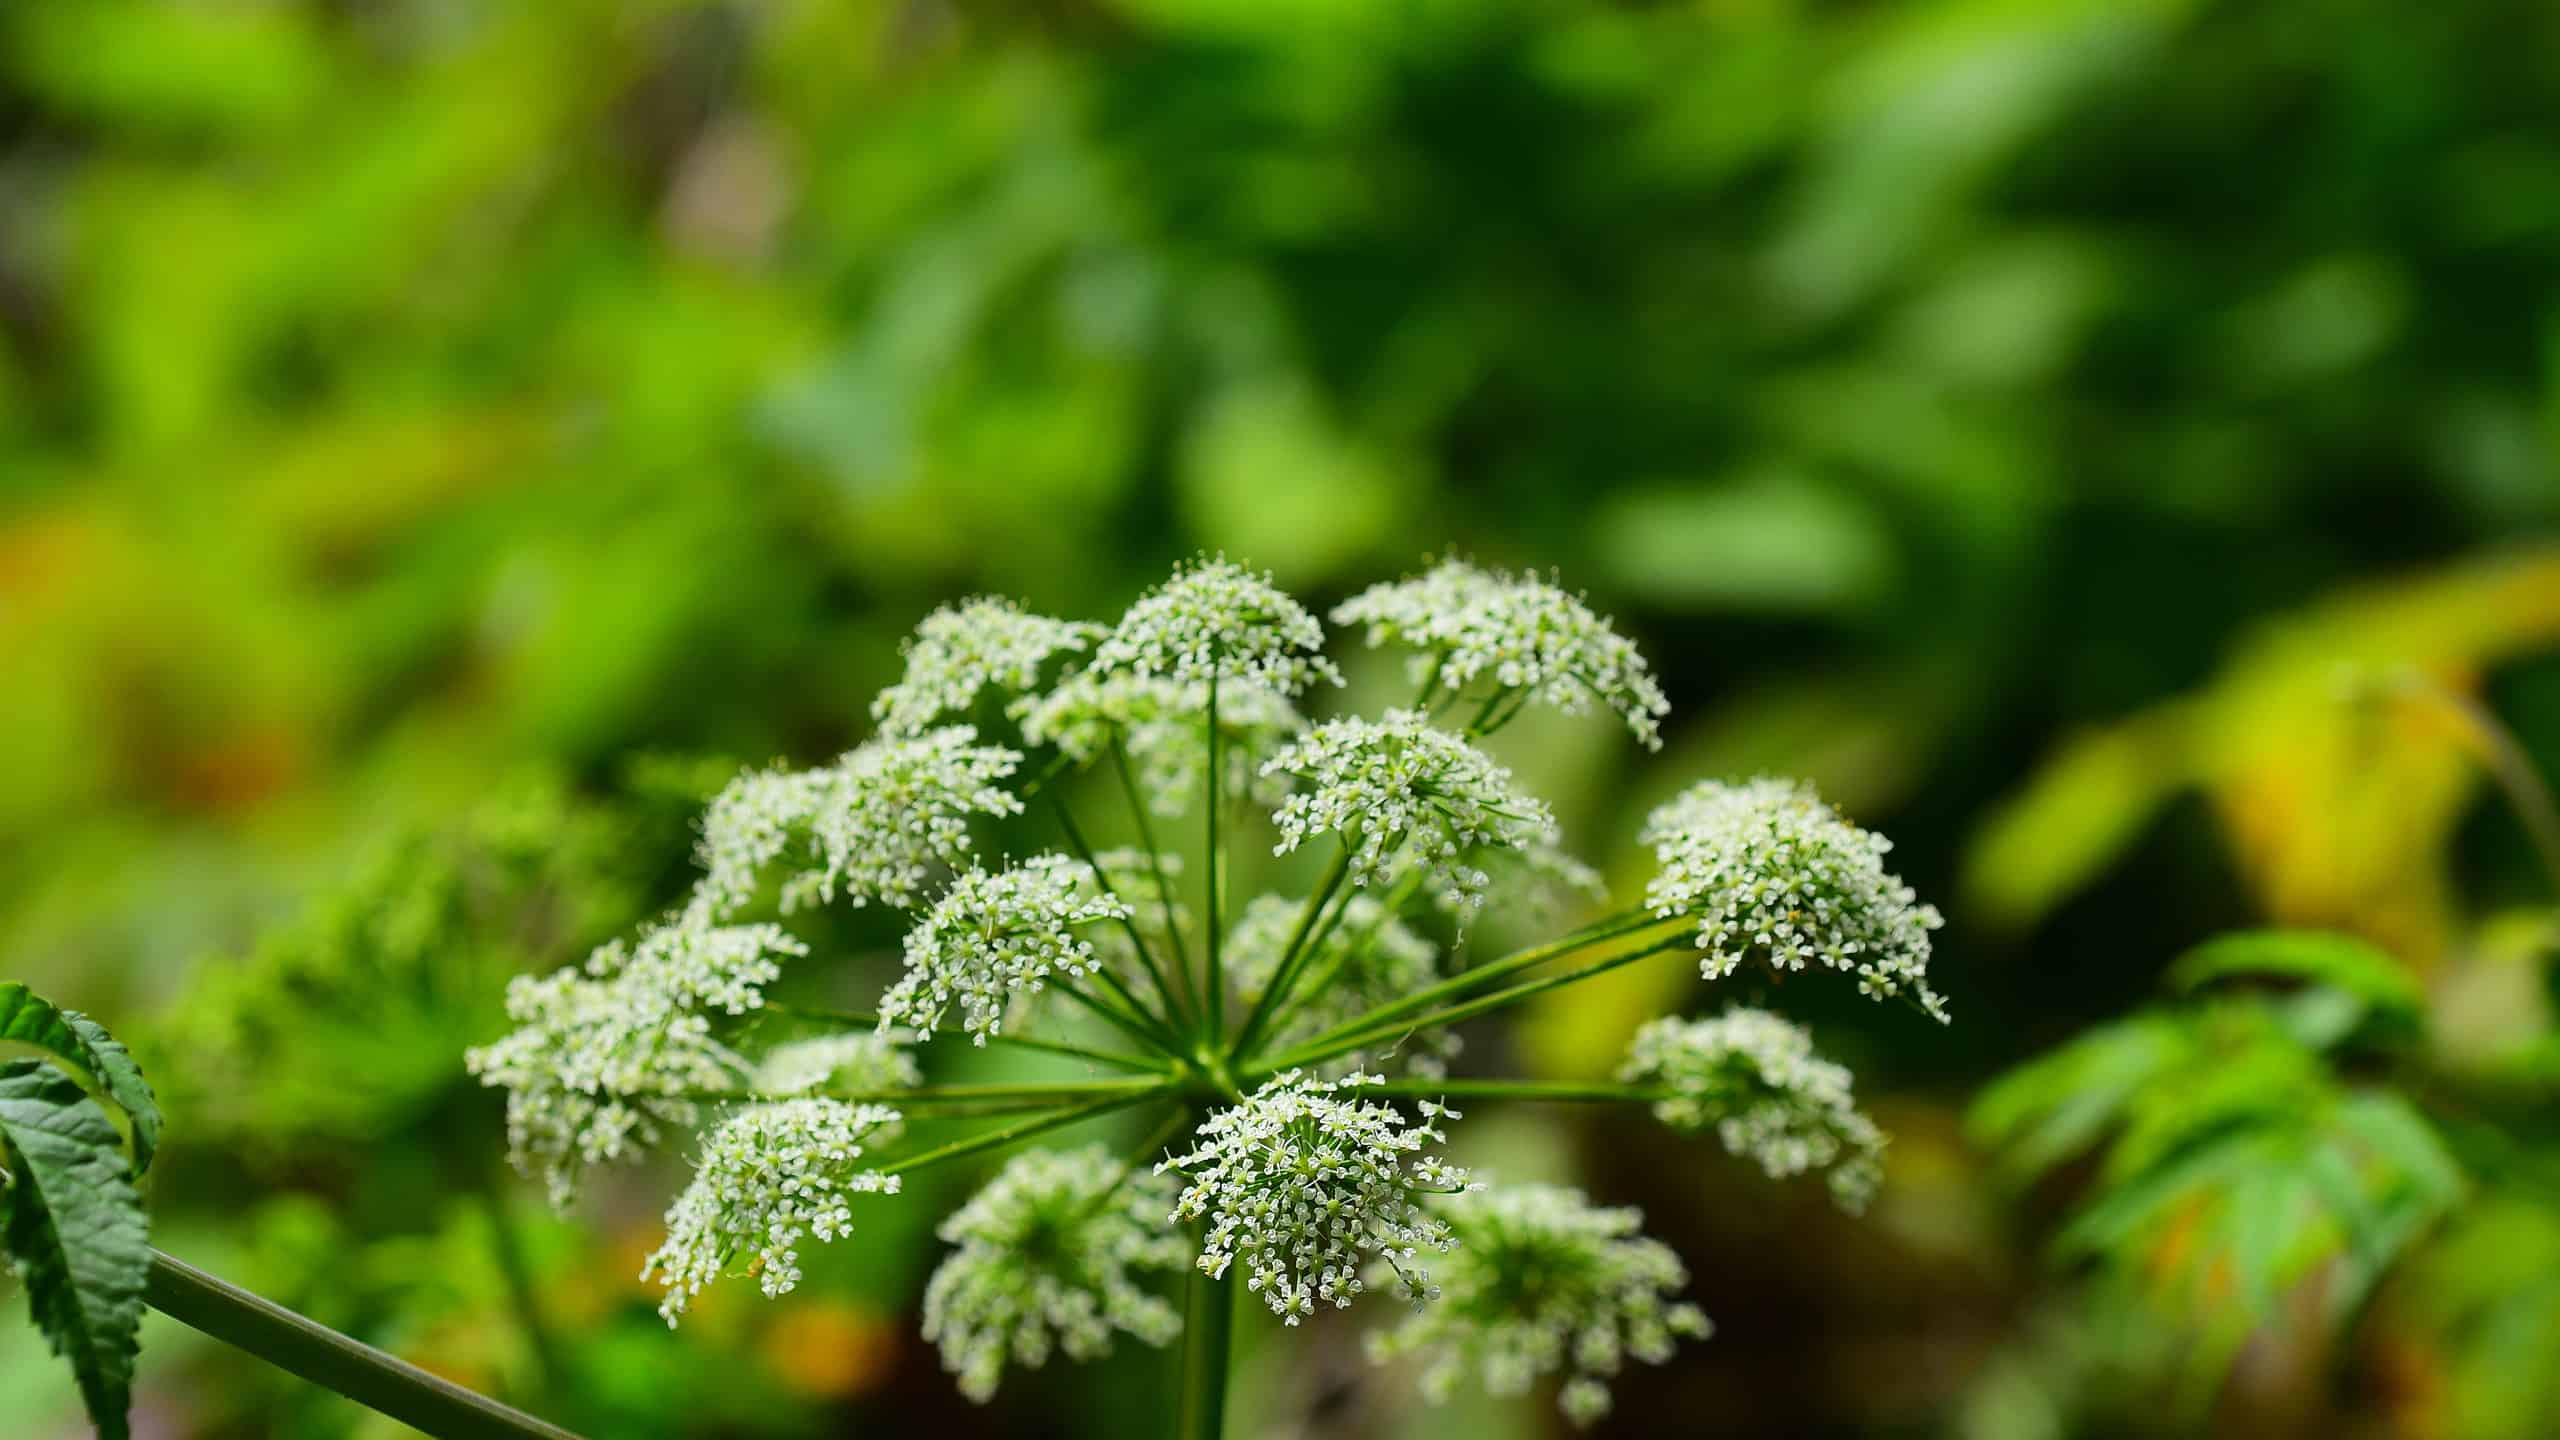 Close up of Water Hemlock (Cicuta maculata). Each flower head is composed of clusters of small, five-petaled white flowers. Photo taken on the Silver River in Ocala, Florida. Nikon D750 with Nikon 200mm Macro lens